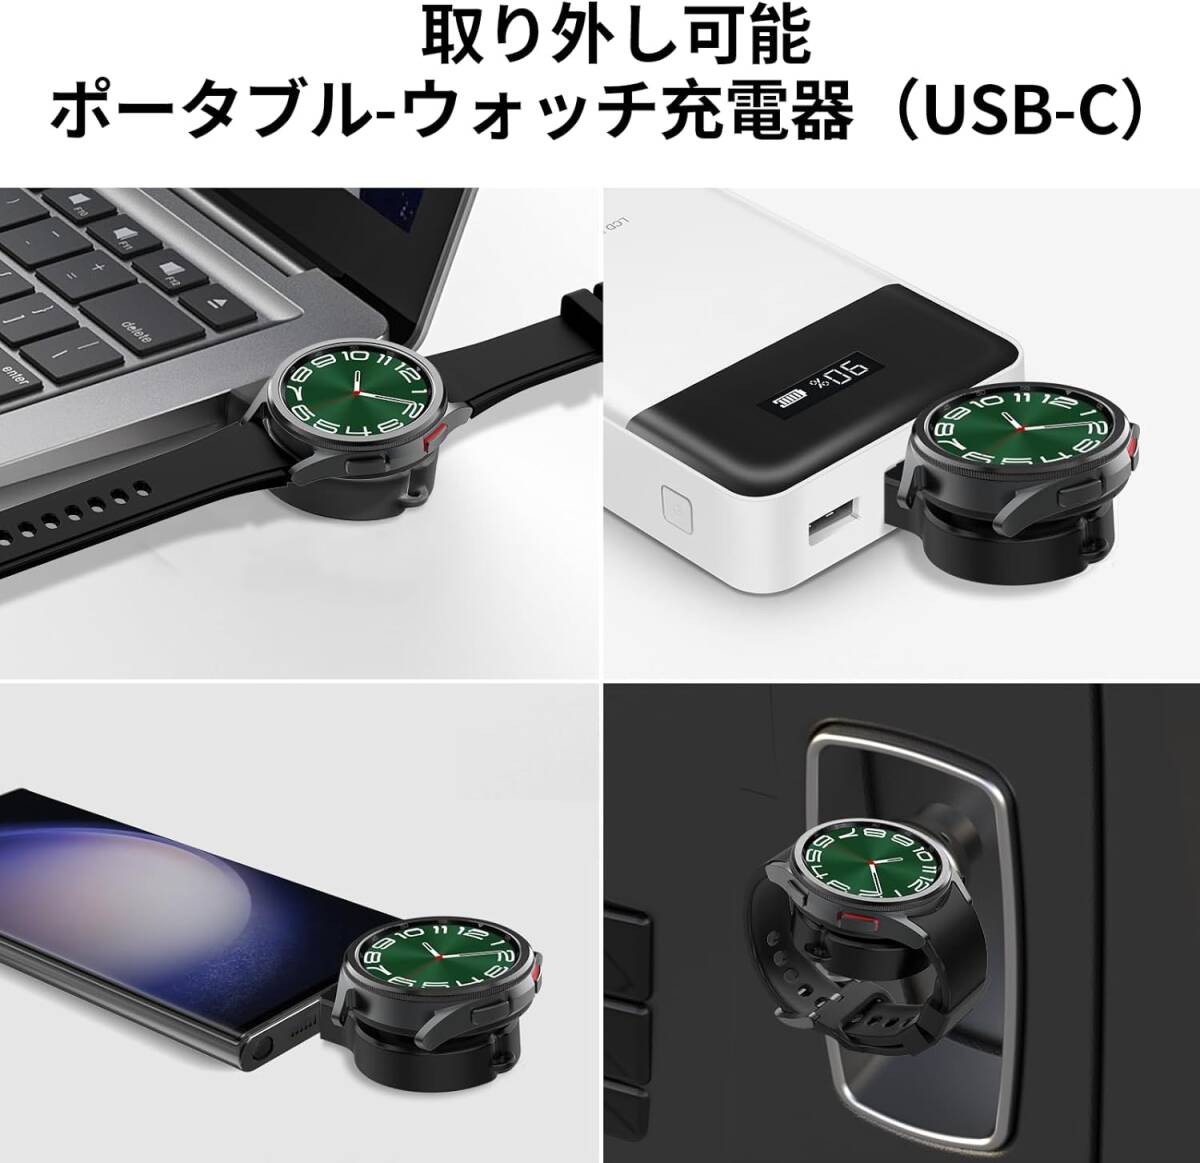 3in1 ワイヤレス充電器 目覚まし時計付き Galaxy S24 ~ S7, Note 20 ~ 8, Galaxy watch 6/5/3/active2/active, Galaxy Buds ブラック_画像3